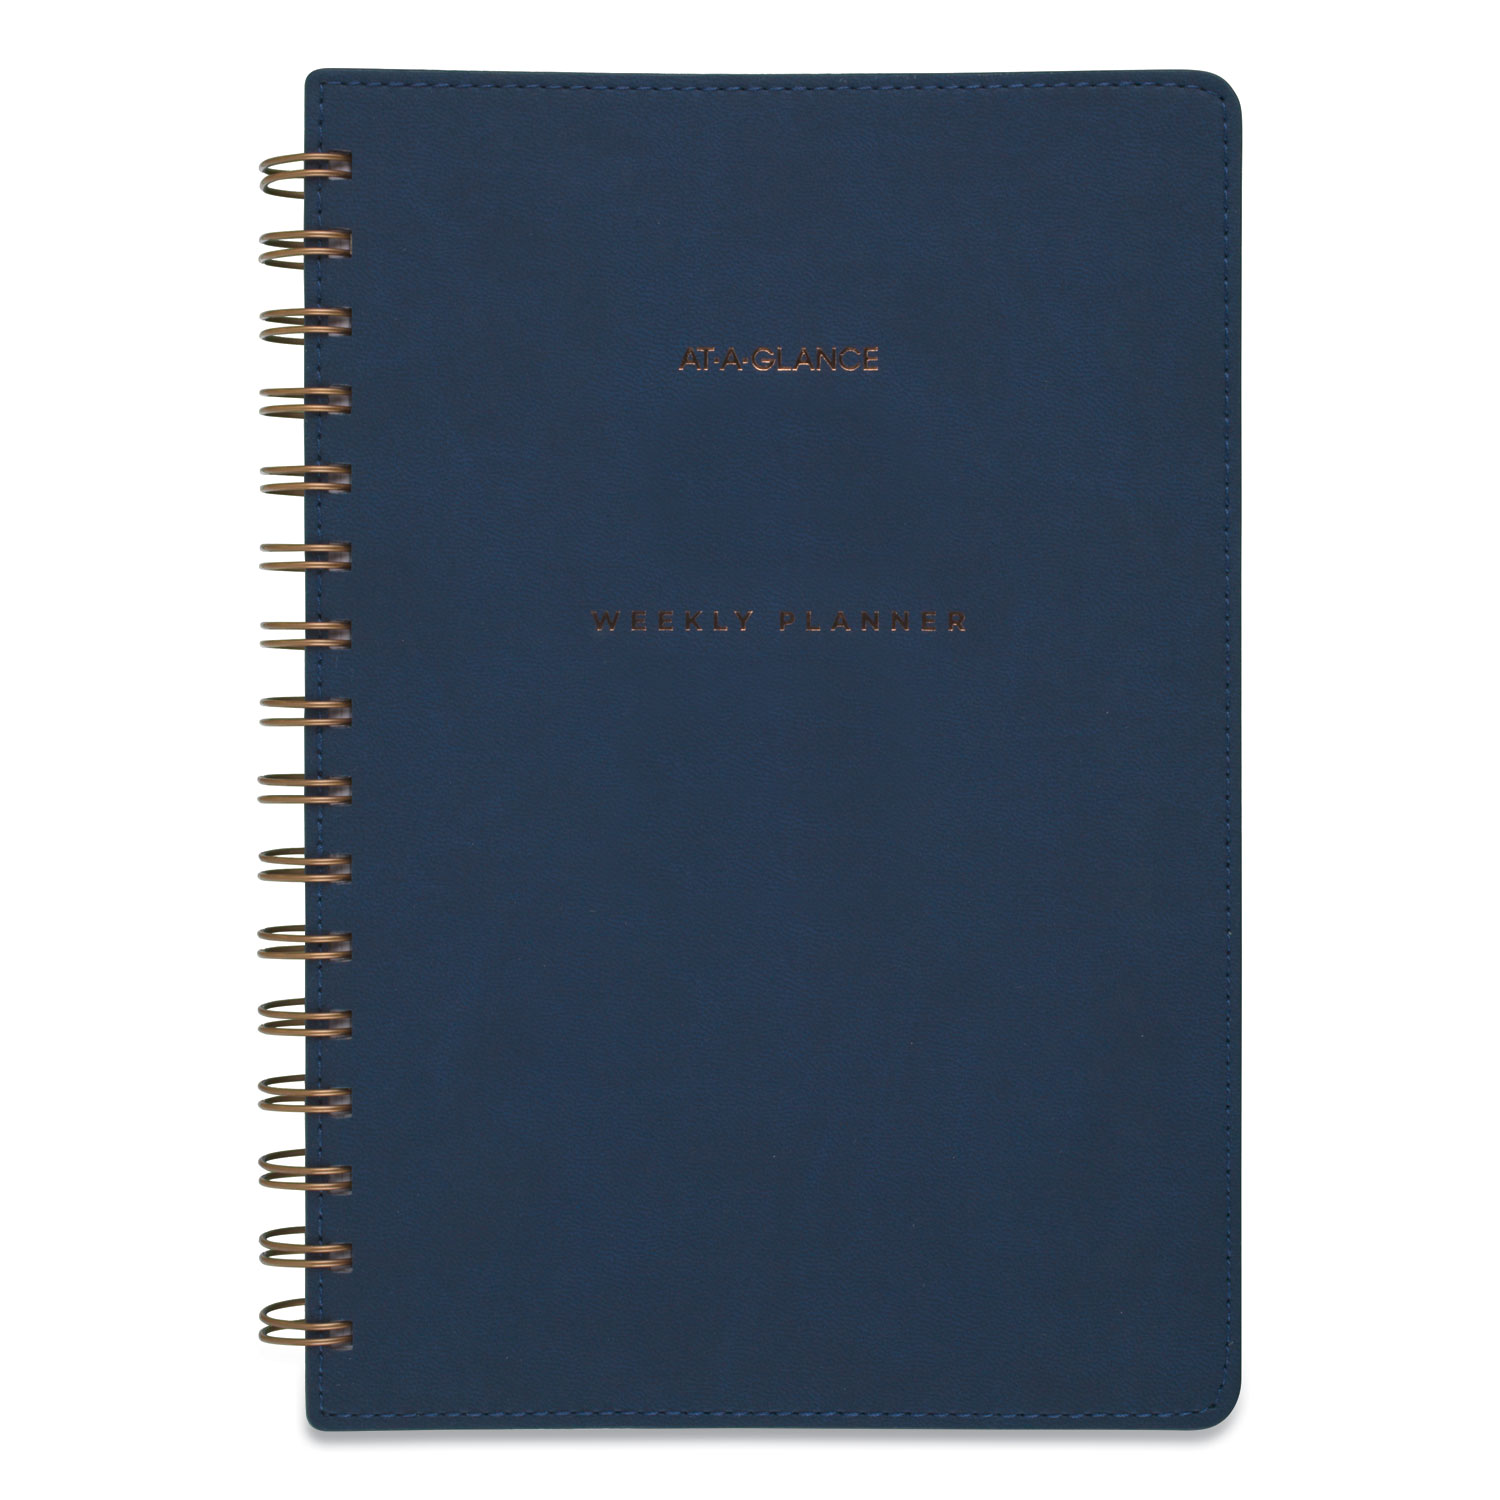  AT-A-GLANCE YP20020 Signature Collection Firenze Navy Weekly/Monthly Planner, 8 1/2 x 5 3/8, 2020-2021 (AAGYP20020) 